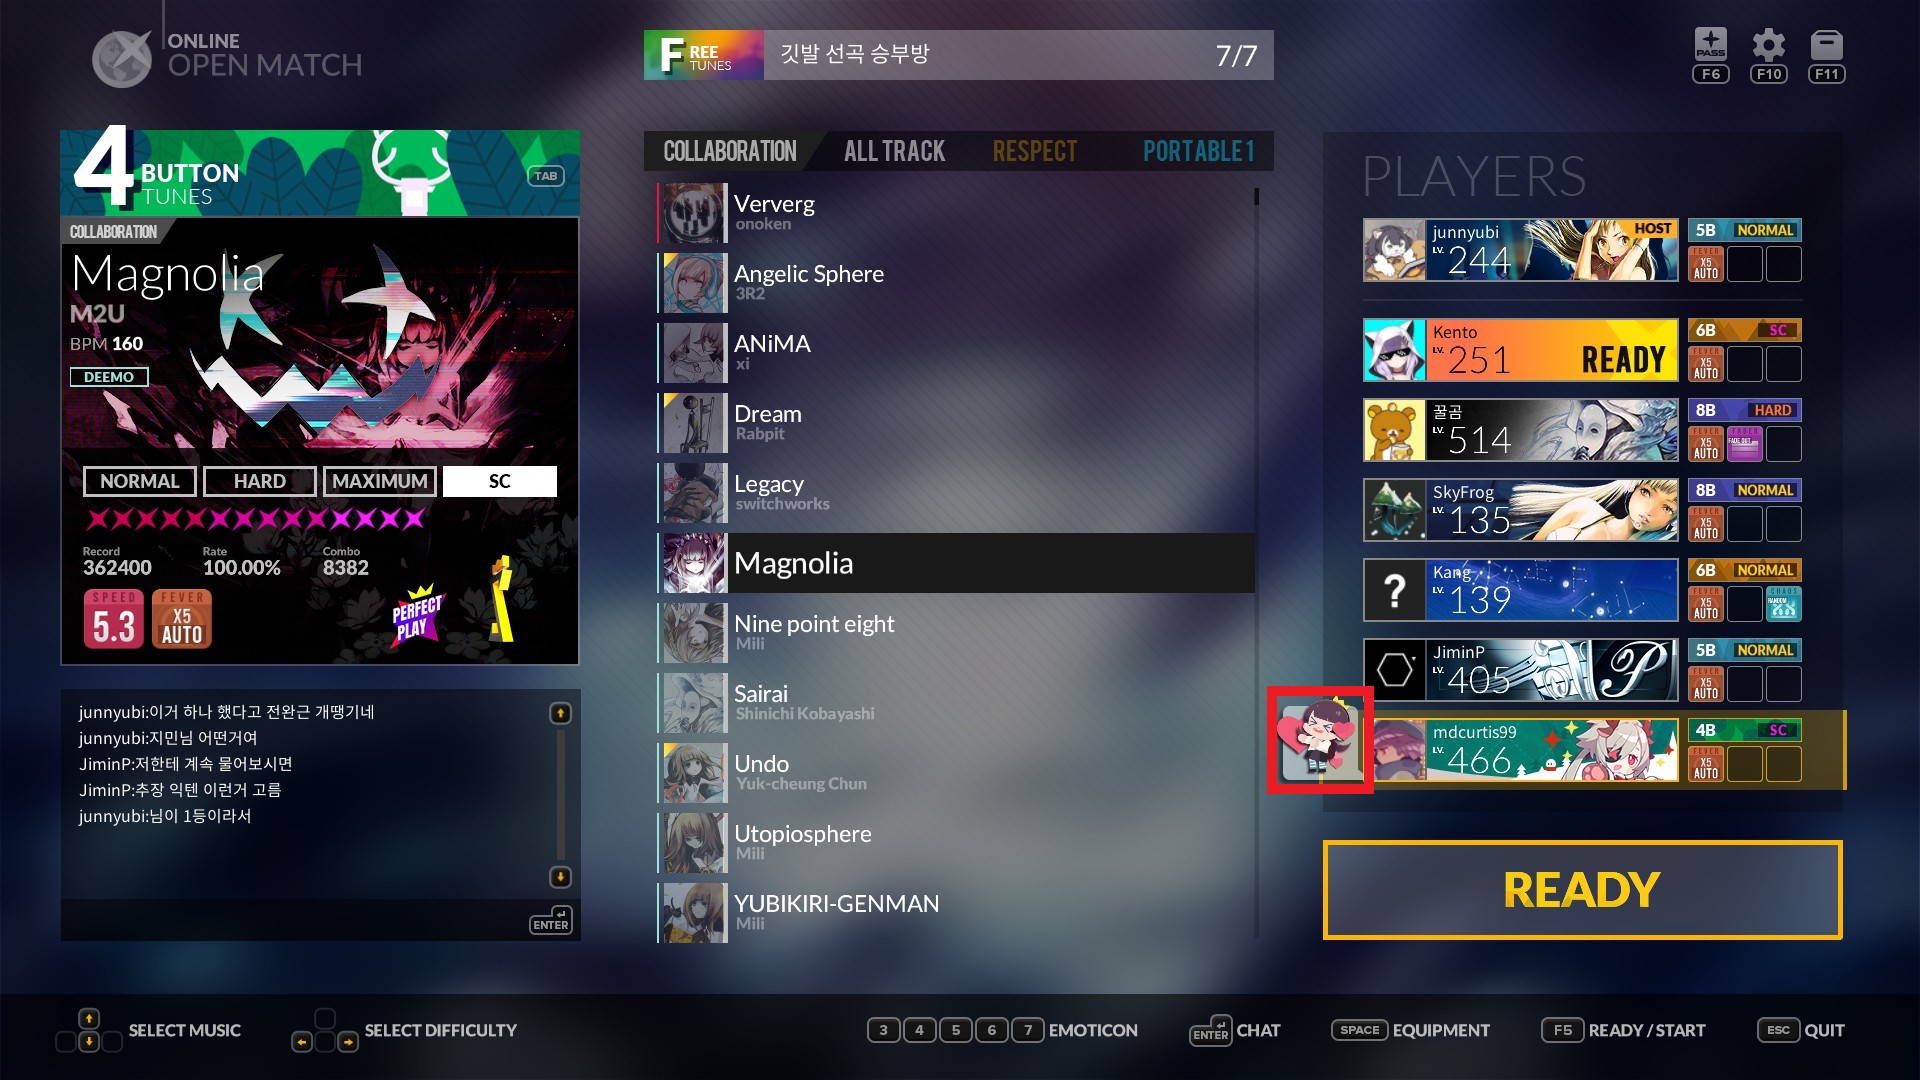 DJMAX RESPECT V - Full Walkthough + All Achievements Guide Complete - Cosmetics - B3EEE46